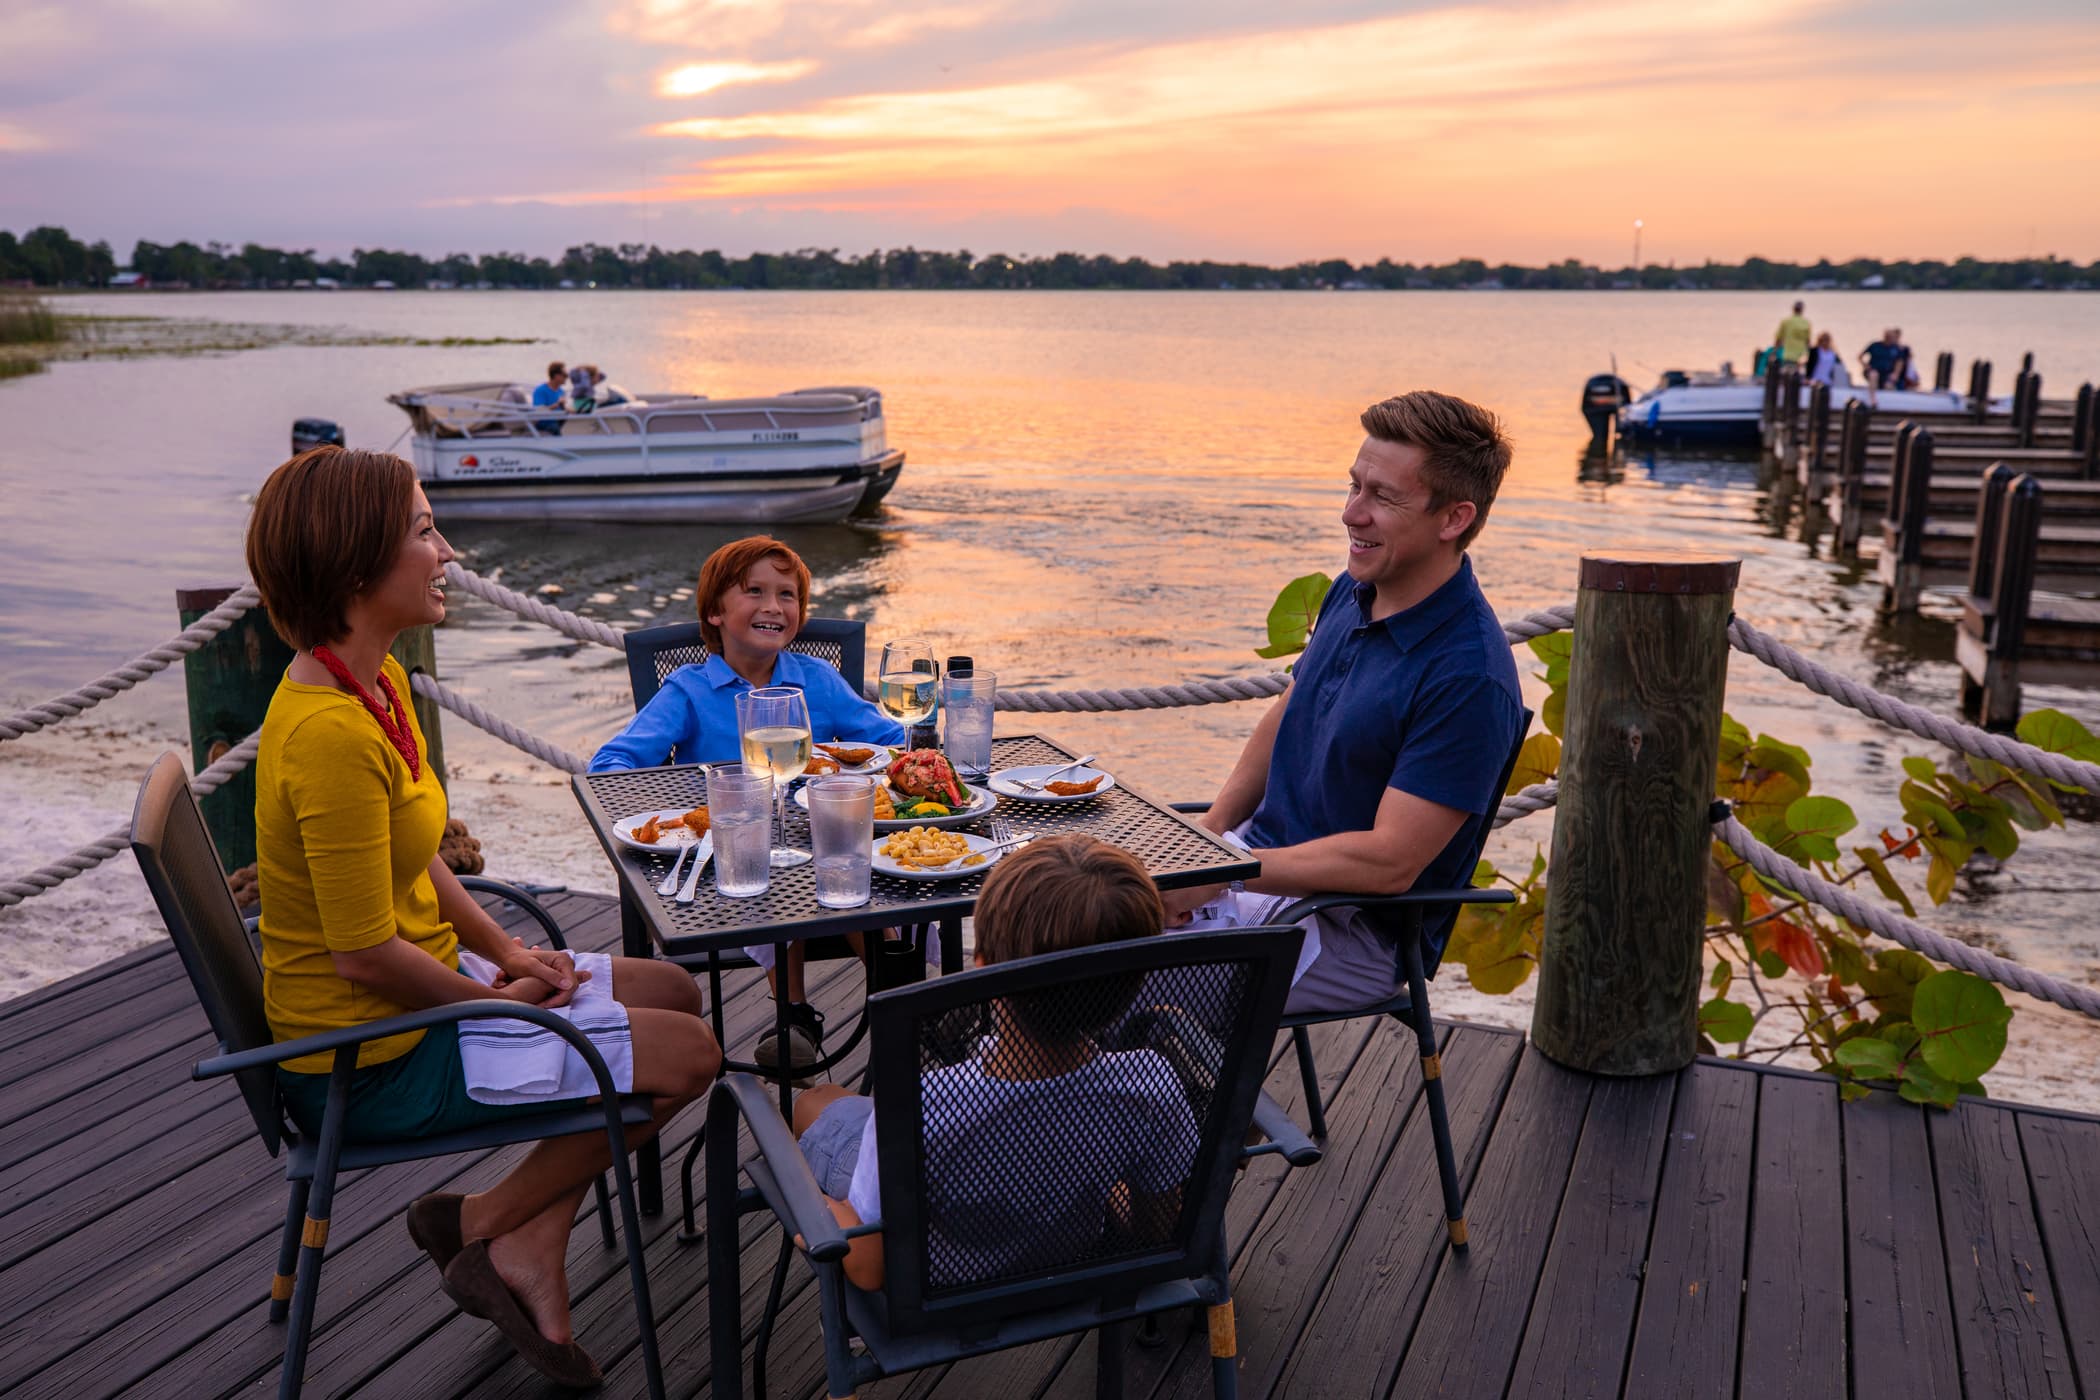 Harborside Restaurant is a great option for waterfront dining in Central Florida, located on Winter Haven's Lake Shipp